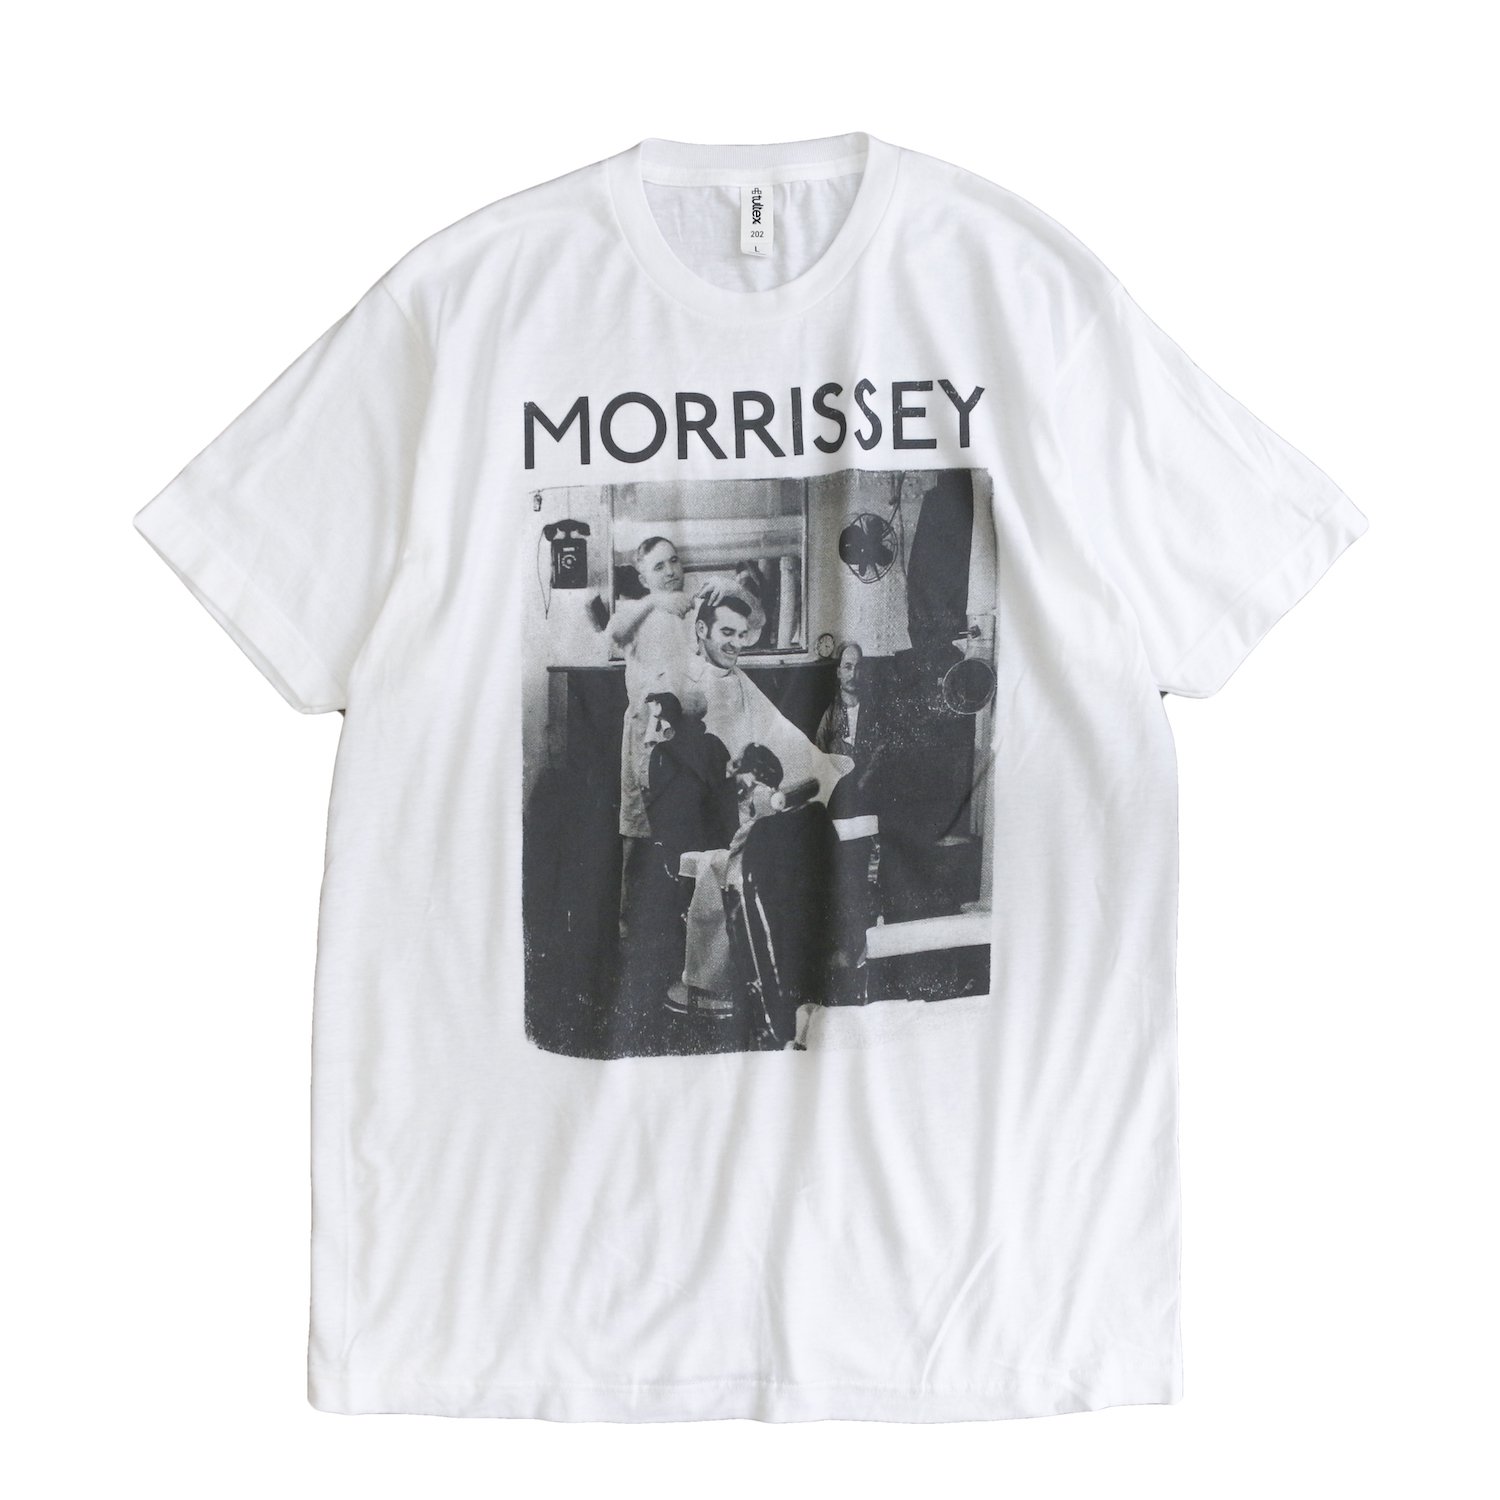 <img class='new_mark_img1' src='https://img.shop-pro.jp/img/new/icons8.gif' style='border:none;display:inline;margin:0px;padding:0px;width:auto;' /> Music Tee / S/S MORRISSEY 